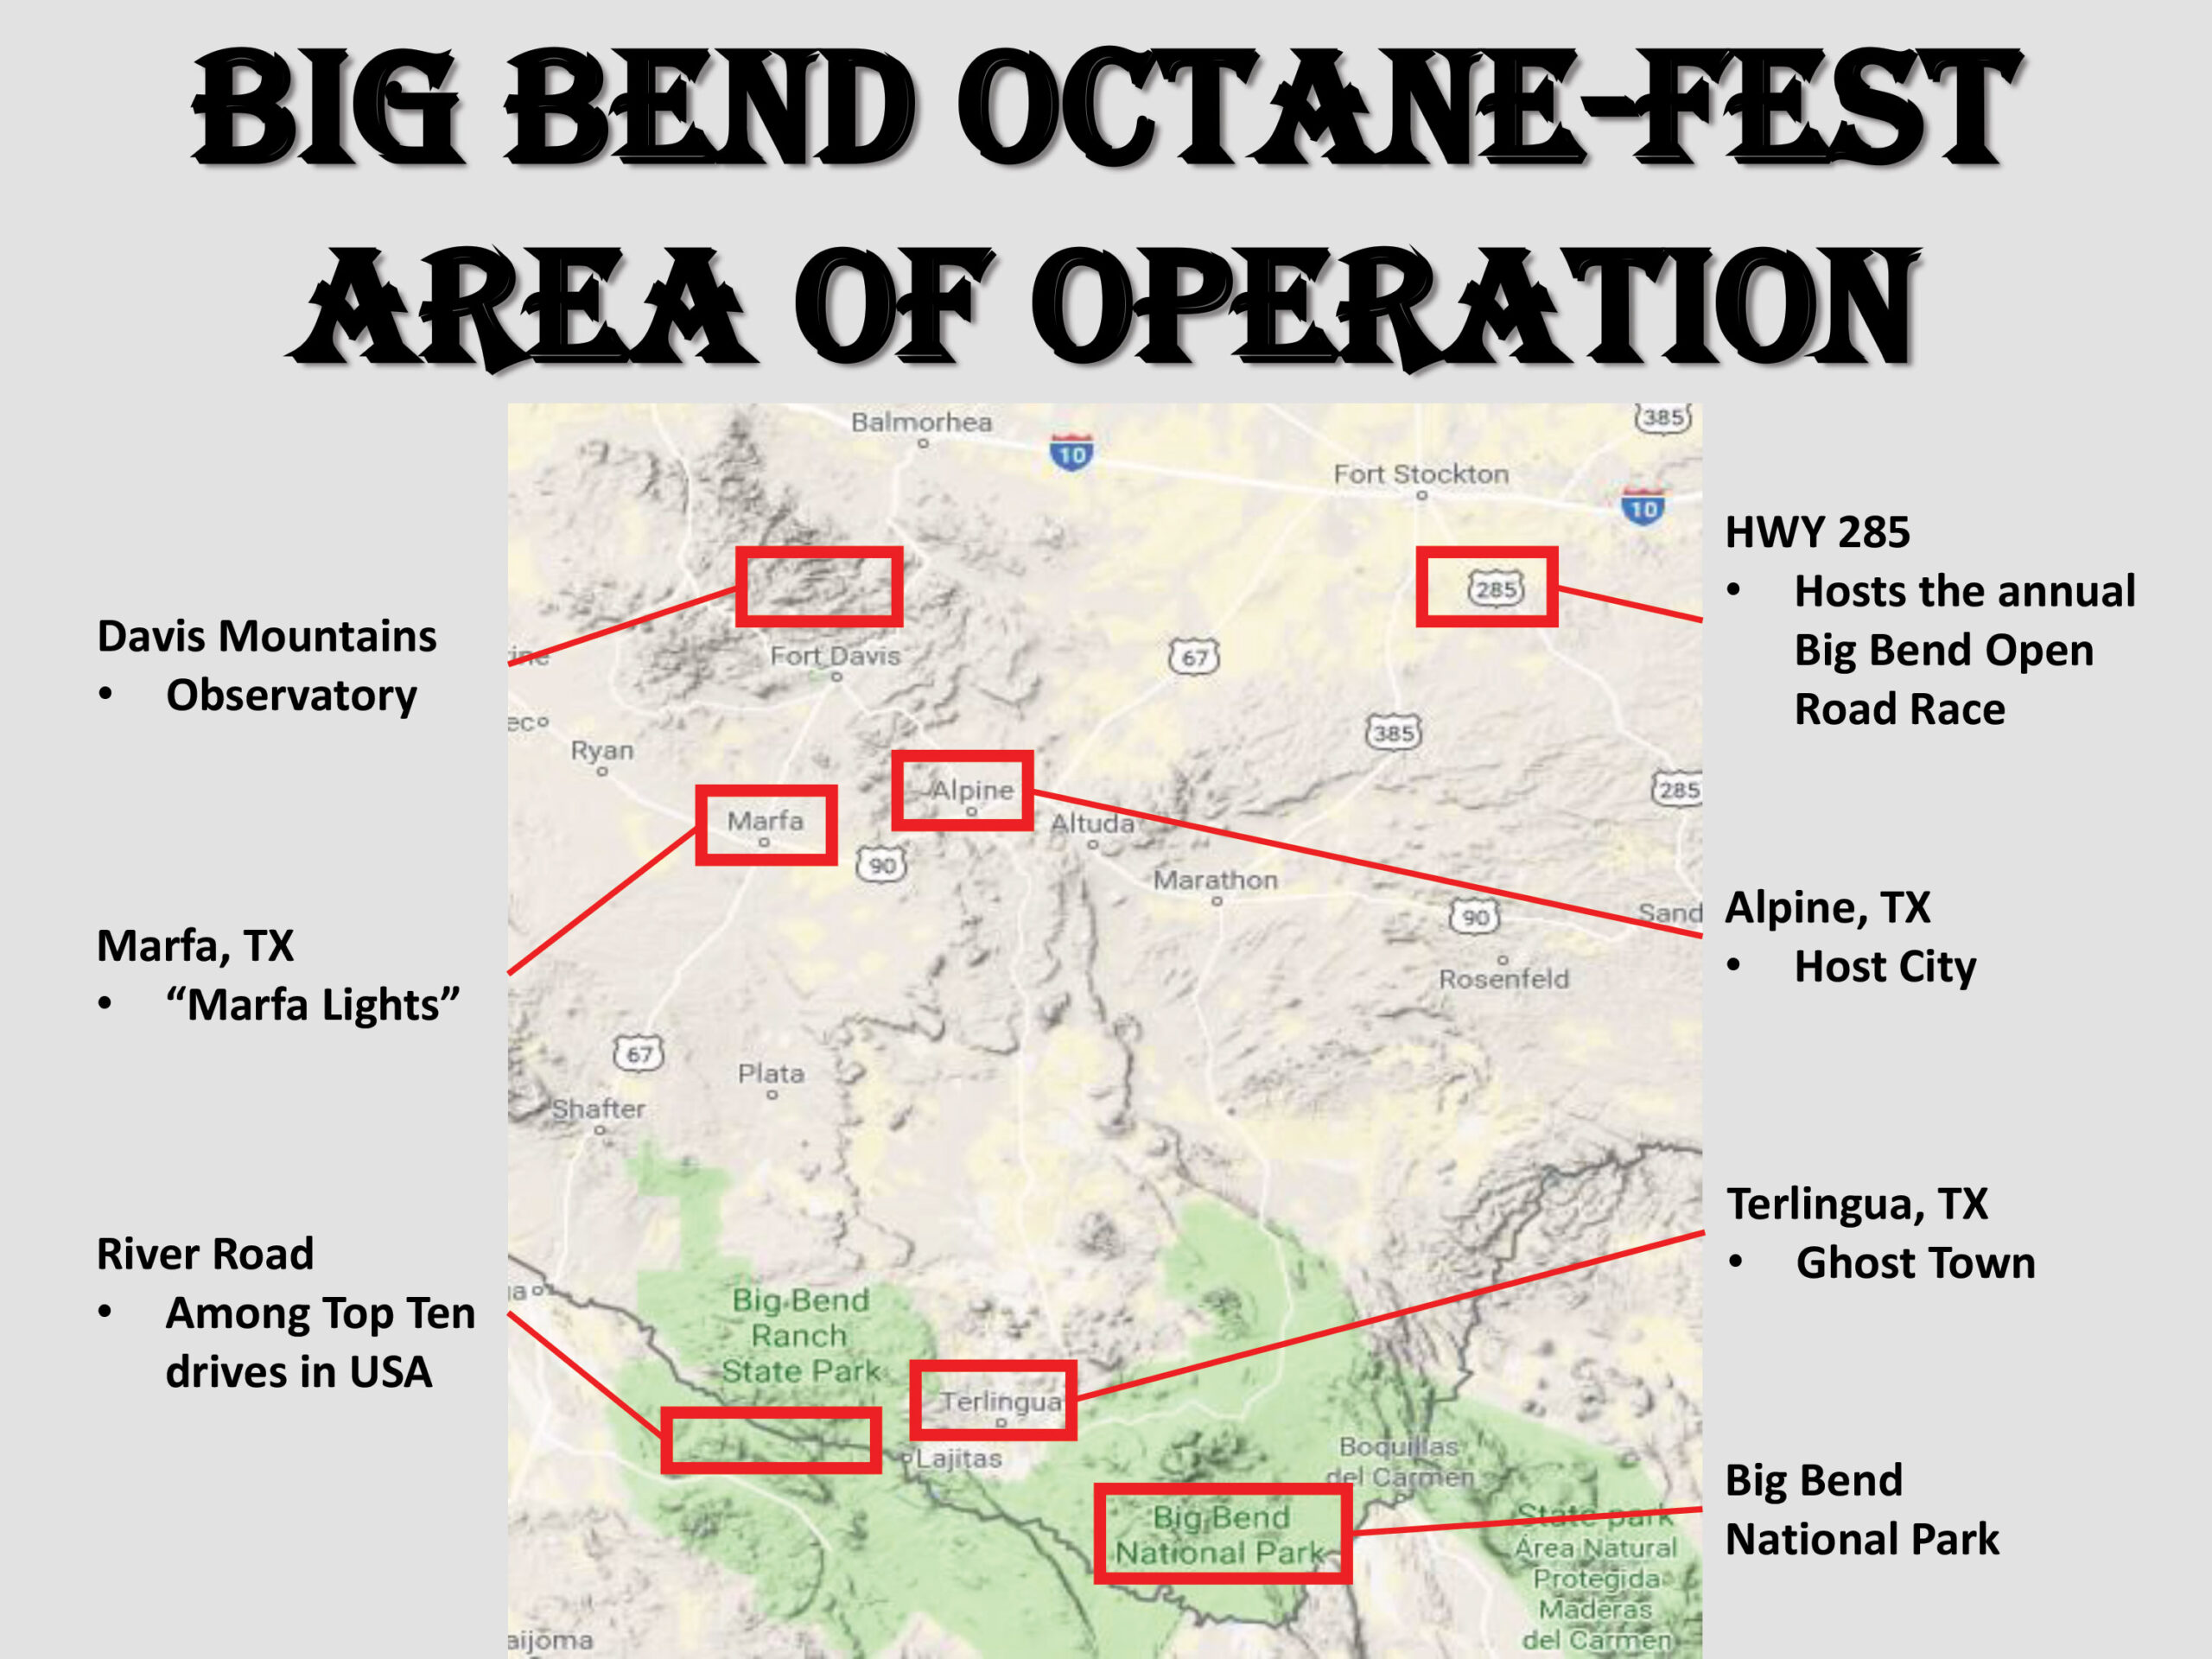 Map of the Big Bend Octane Fest Area of Operation